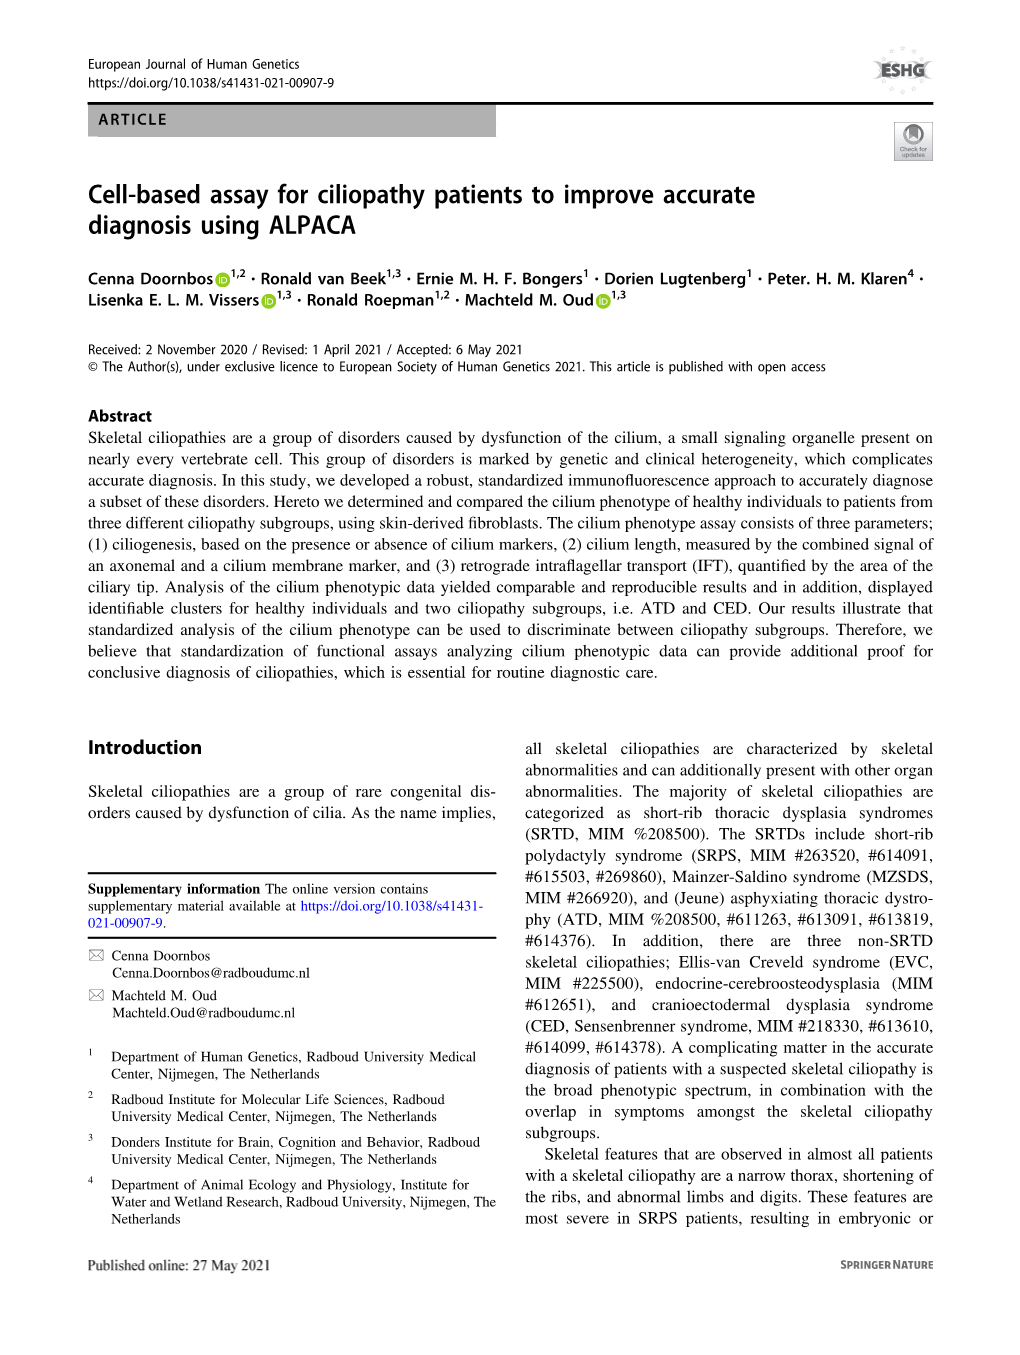 Cell-Based Assay for Ciliopathy Patients to Improve Accurate Diagnosis Using ALPACA